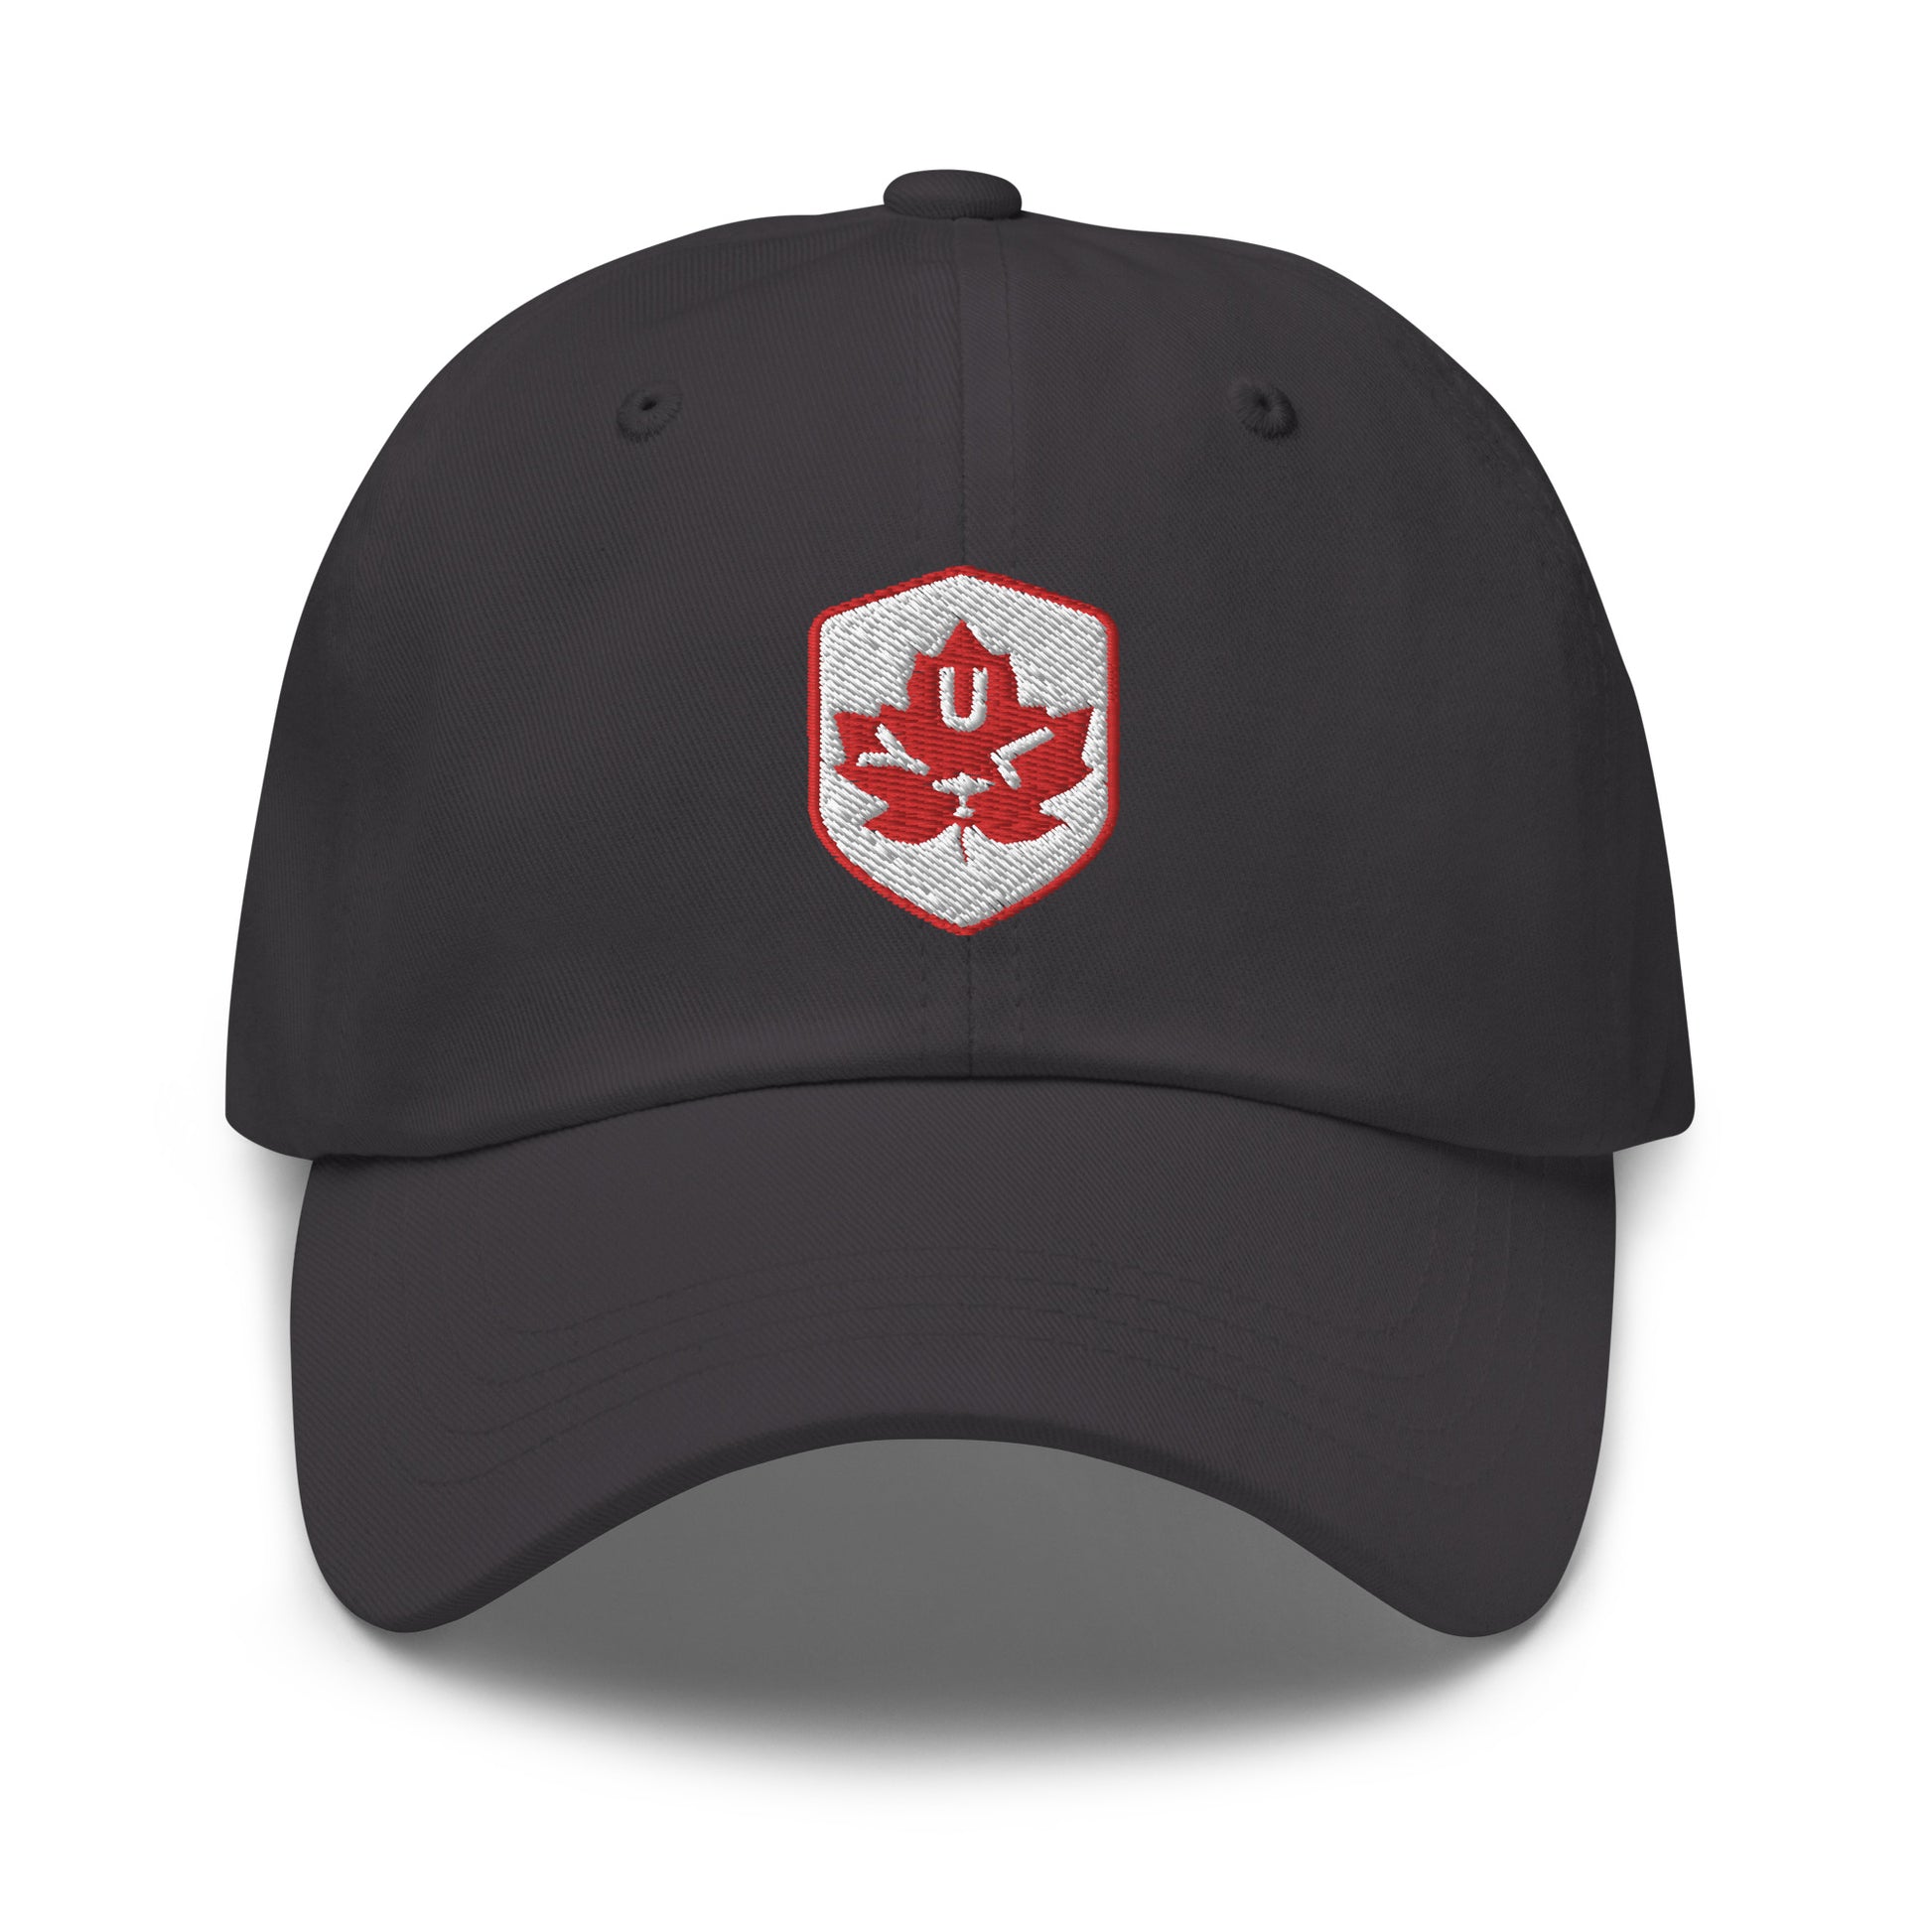 Maple Leaf Baseball Cap - Red/White • YUL Montreal • YHM Designs - Image 17